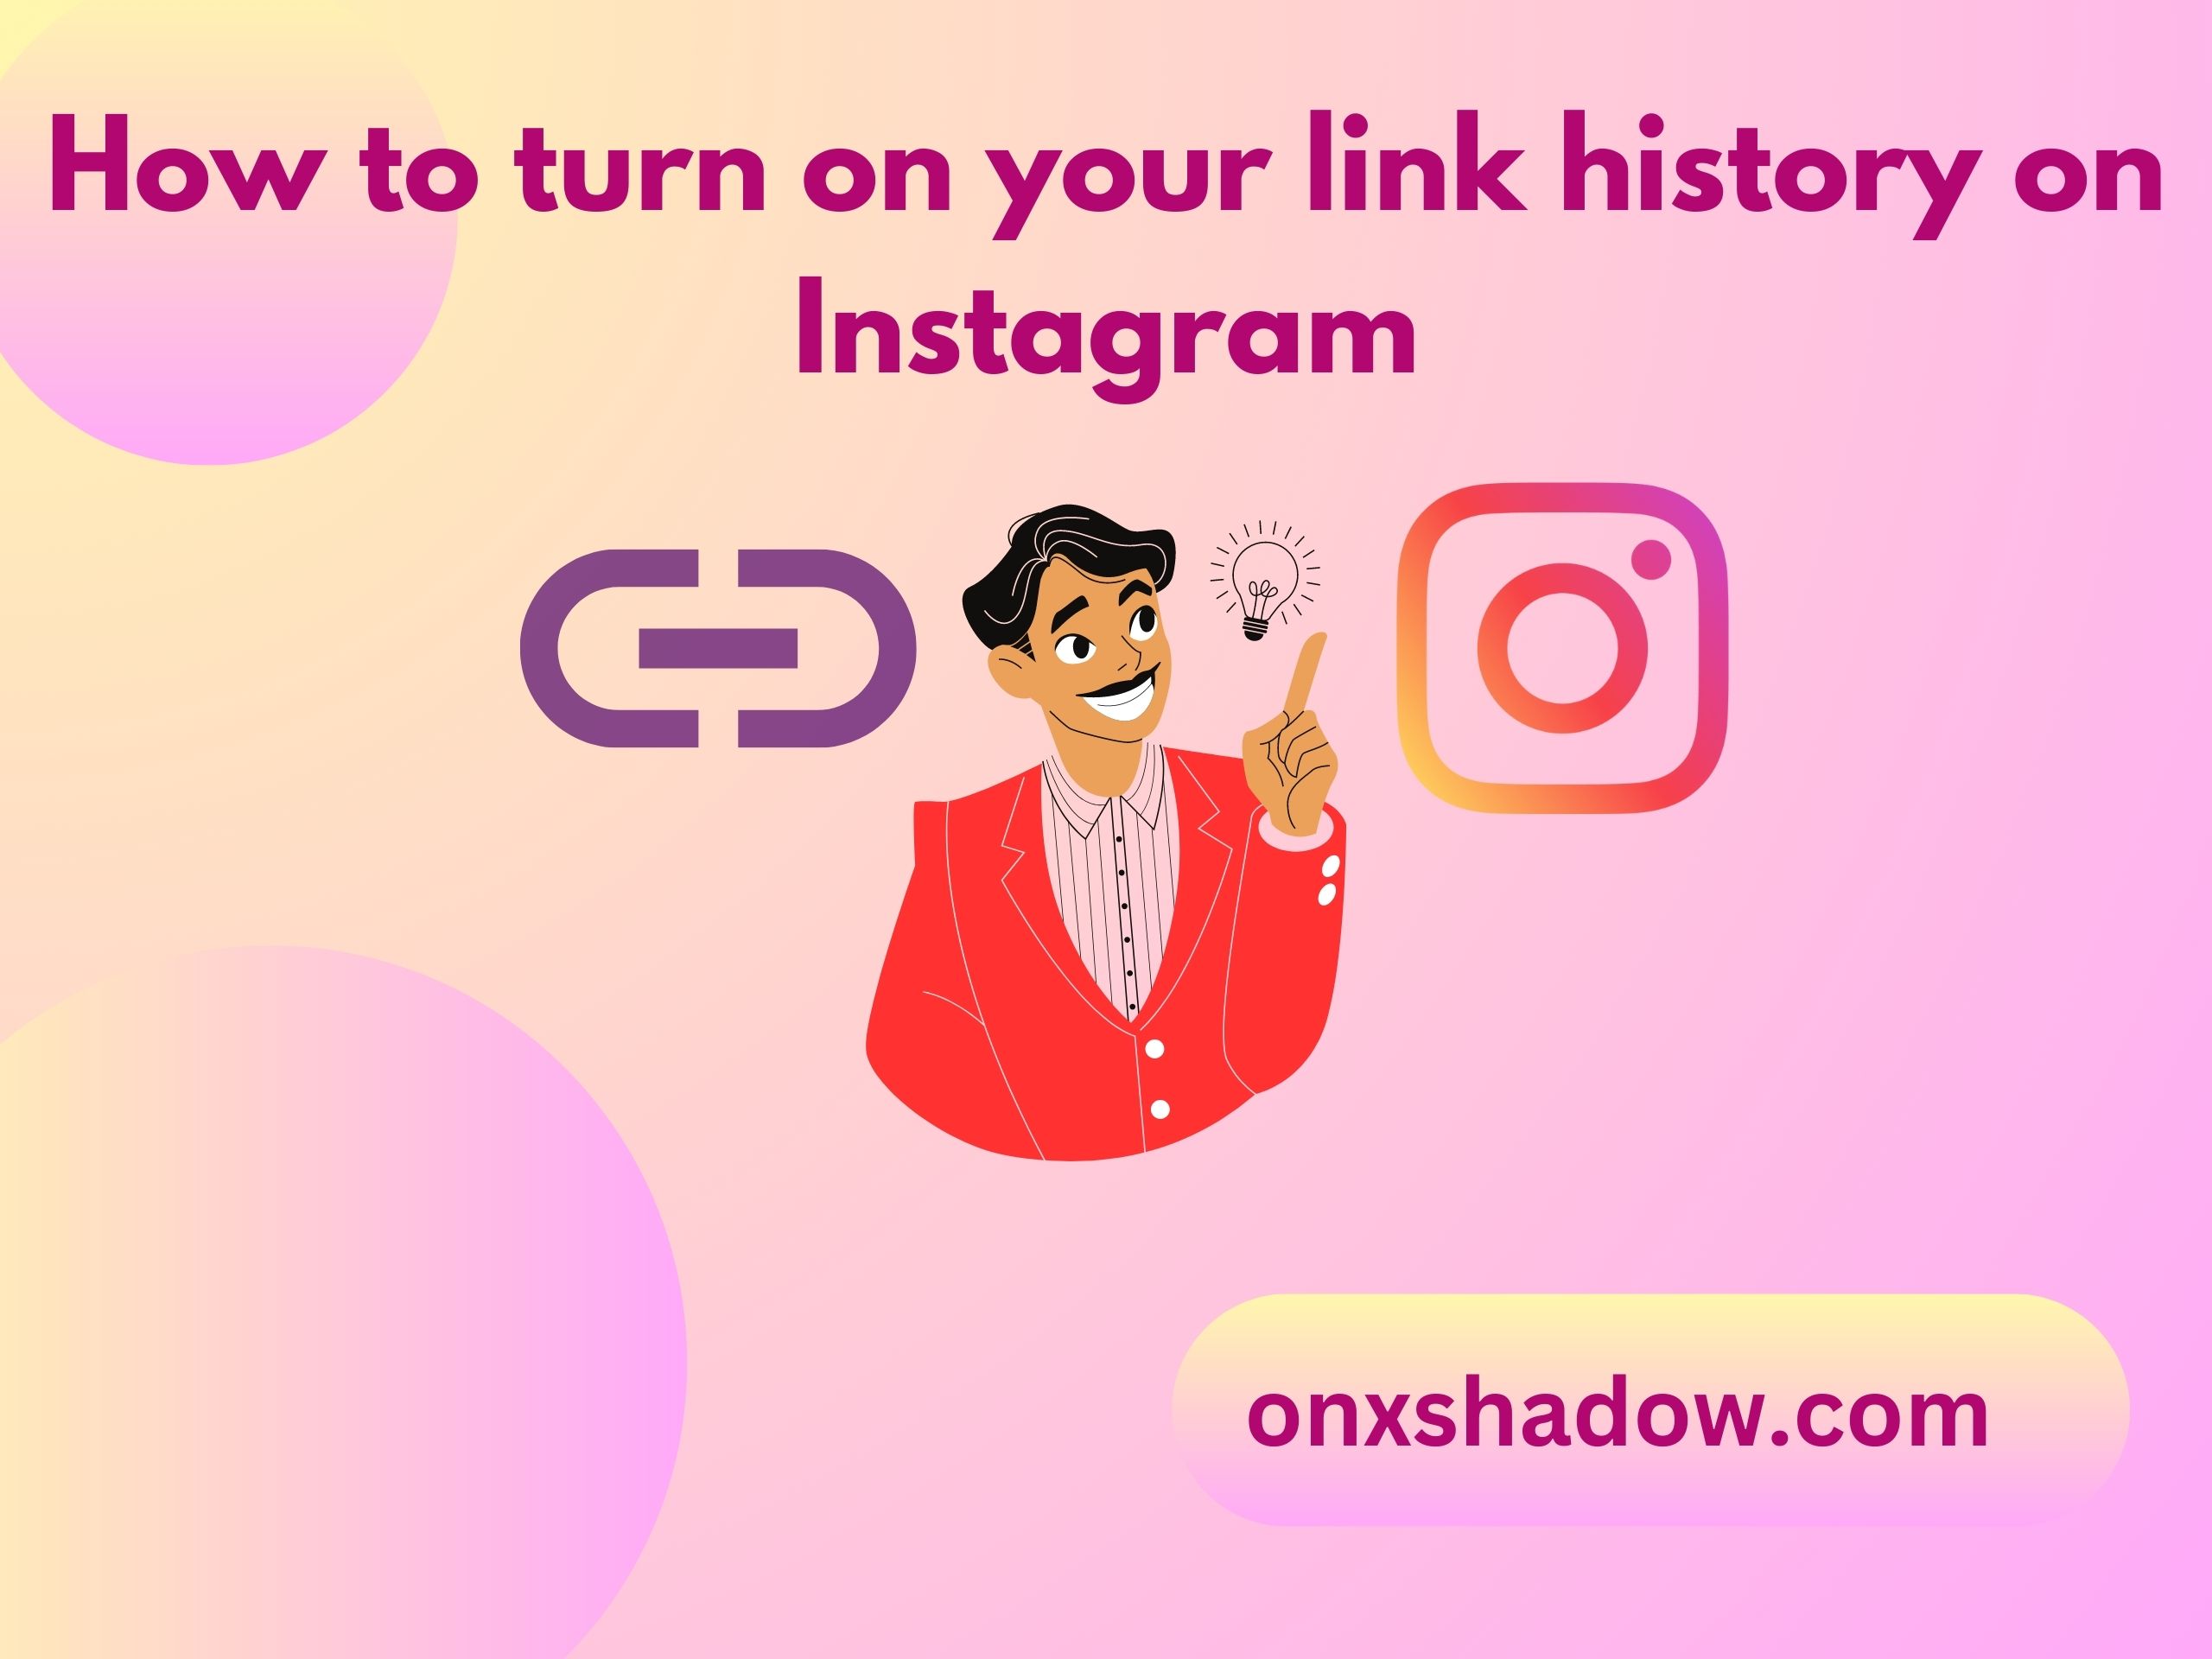 How to turn on your link history on Instagram